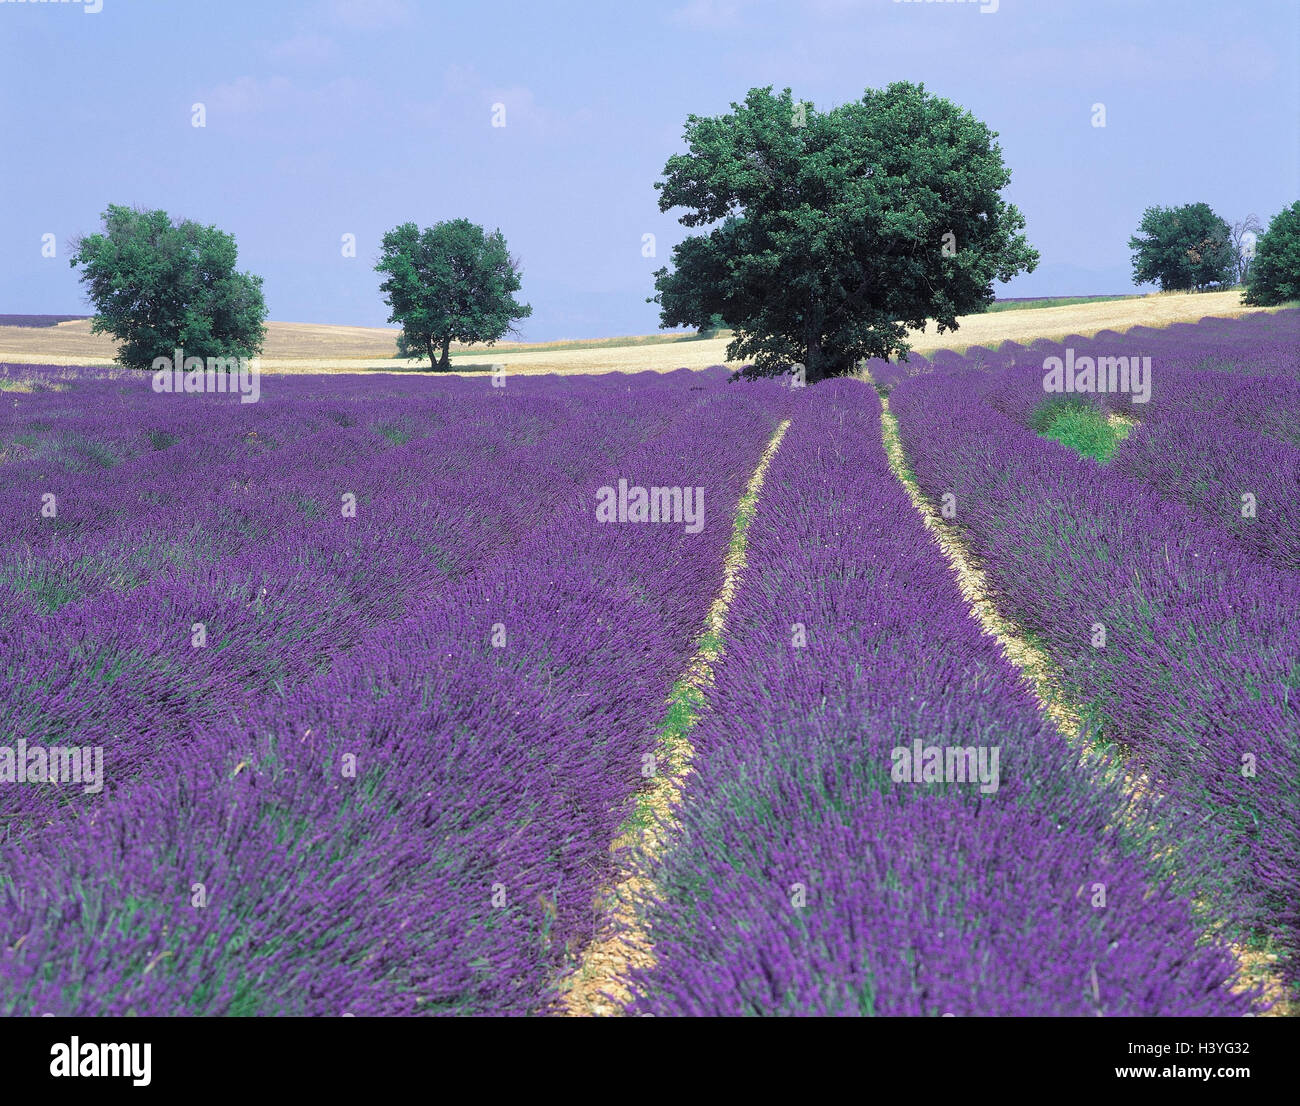 France, Provence, lavender field, Lavandula spec., Europe, scenery, field, cultivation, lavender, agriculture, economy, plants, useful plants, field economy, trees, broad-leaved trees, nature Stock Photo